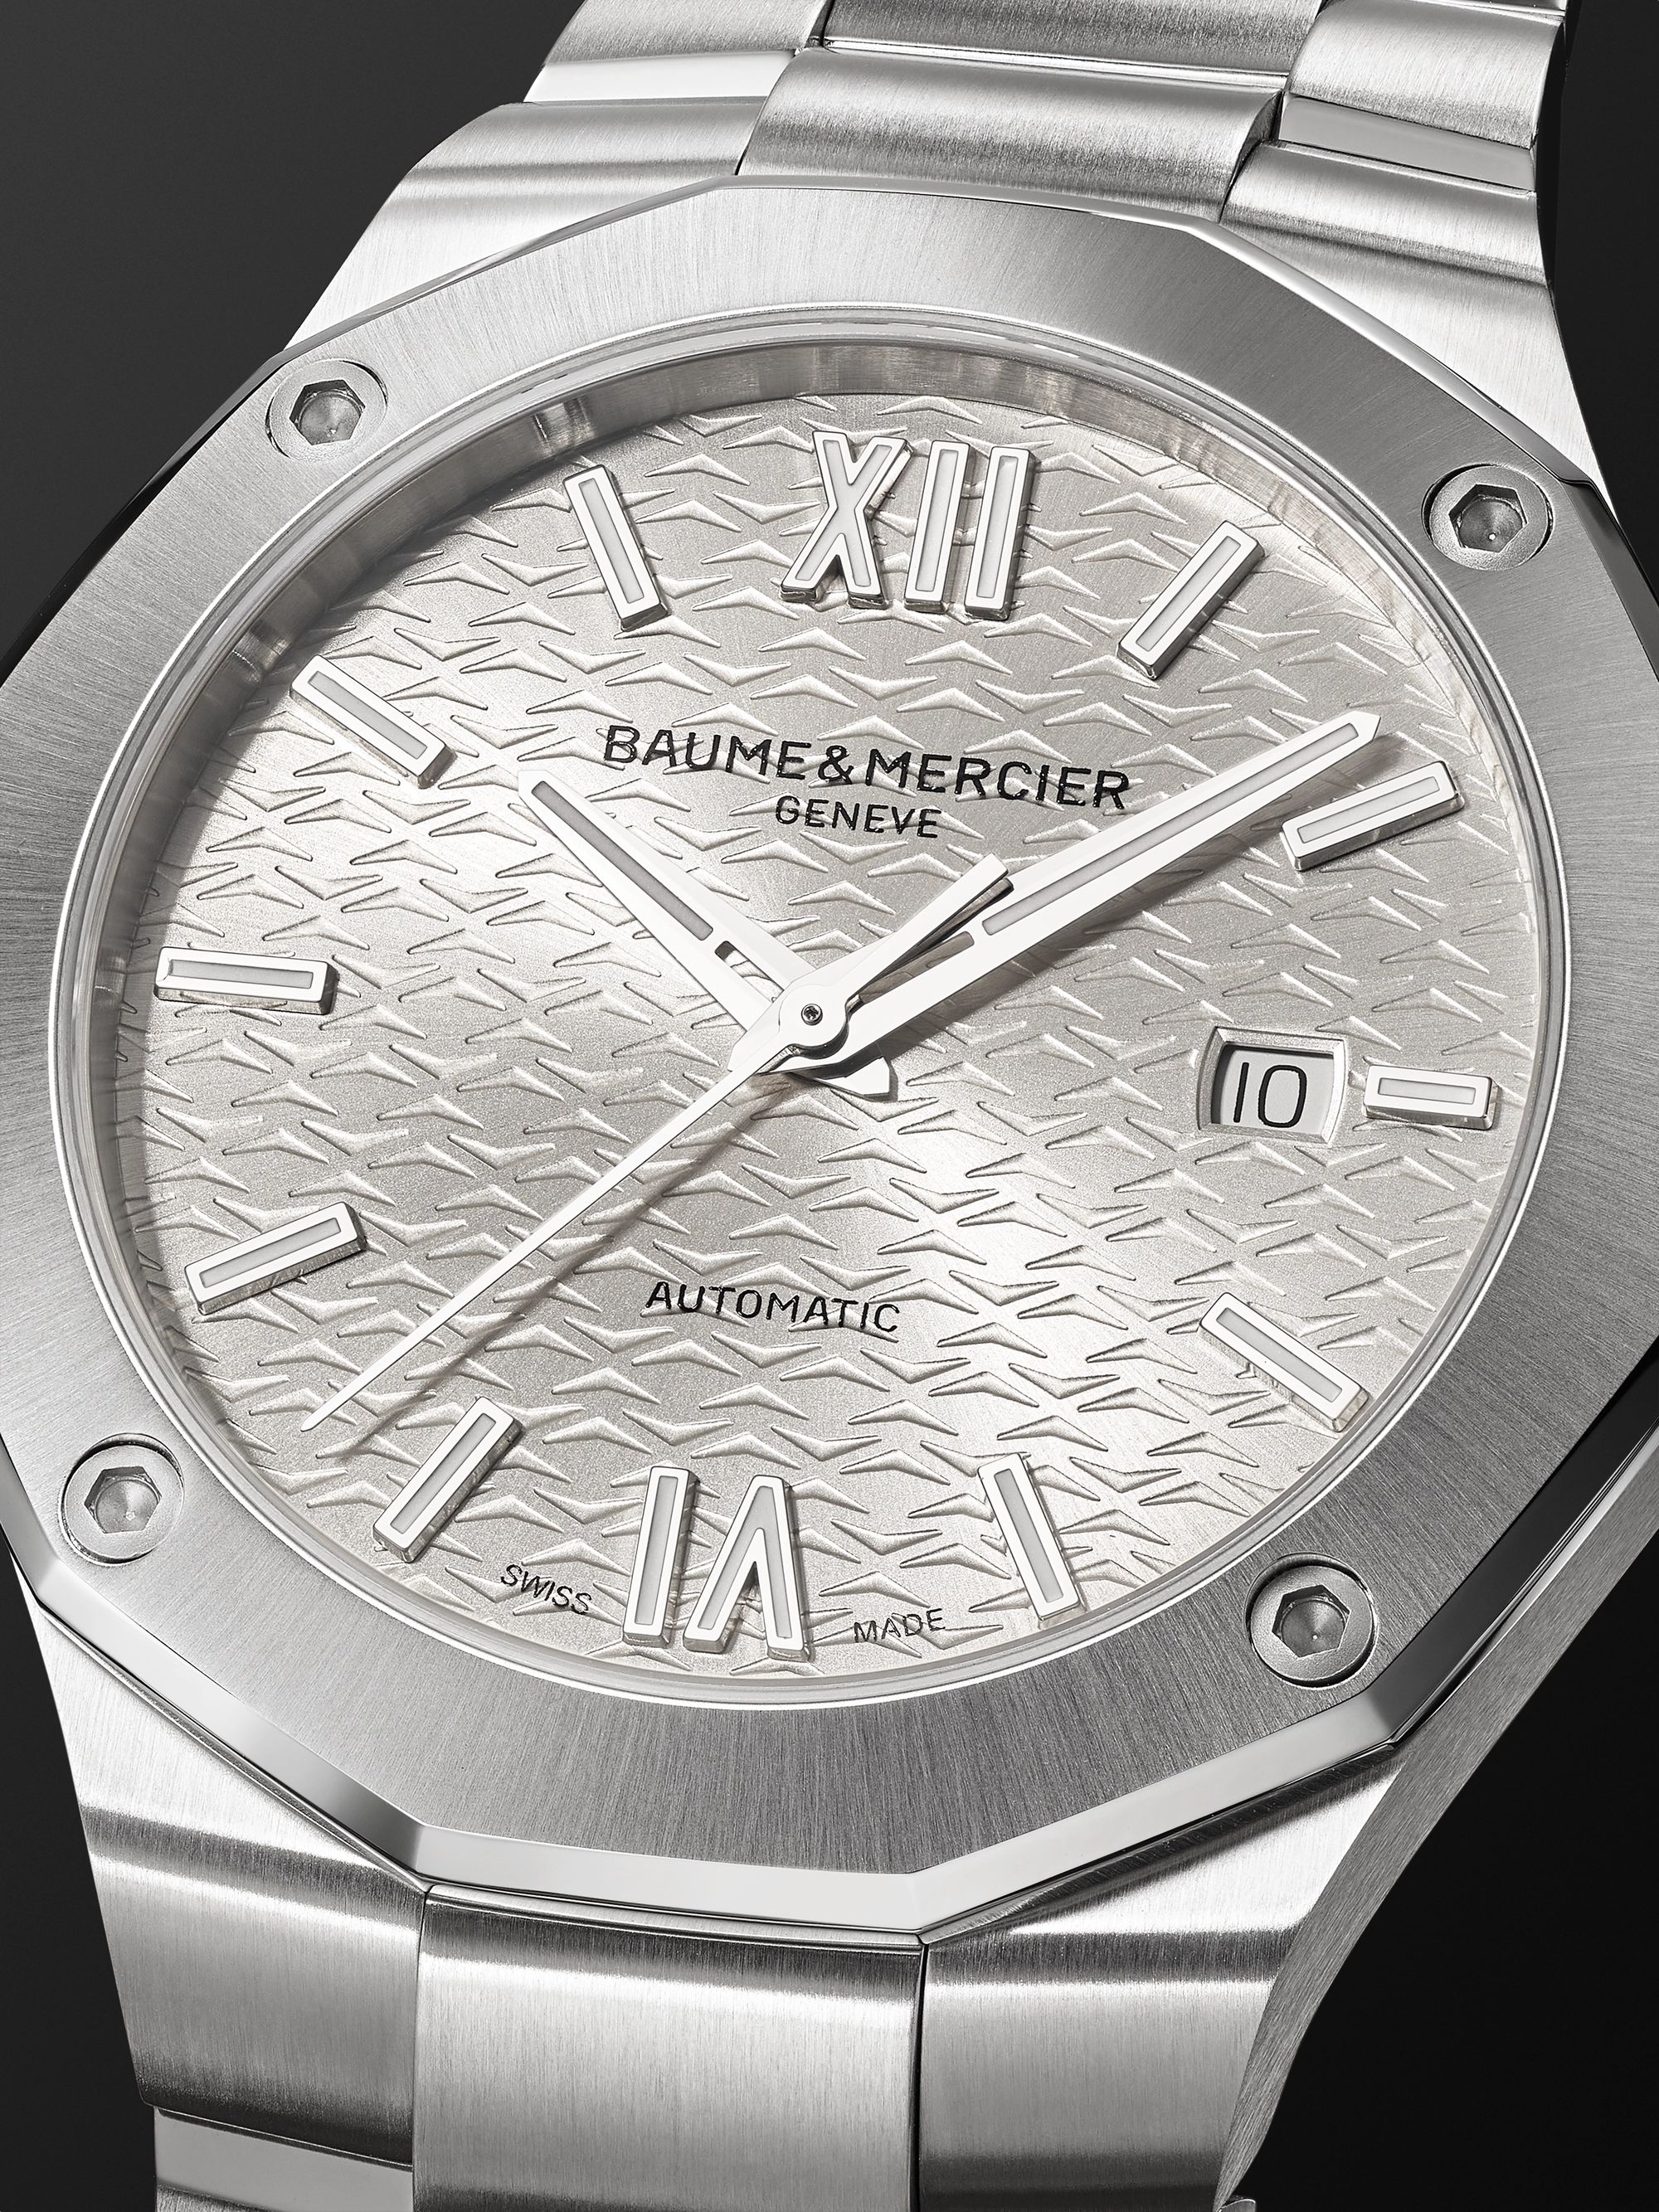 BAUME & MERCIER Riviera Automatic 42mm Stainless Steel Watch, Ref. No. M0A10622